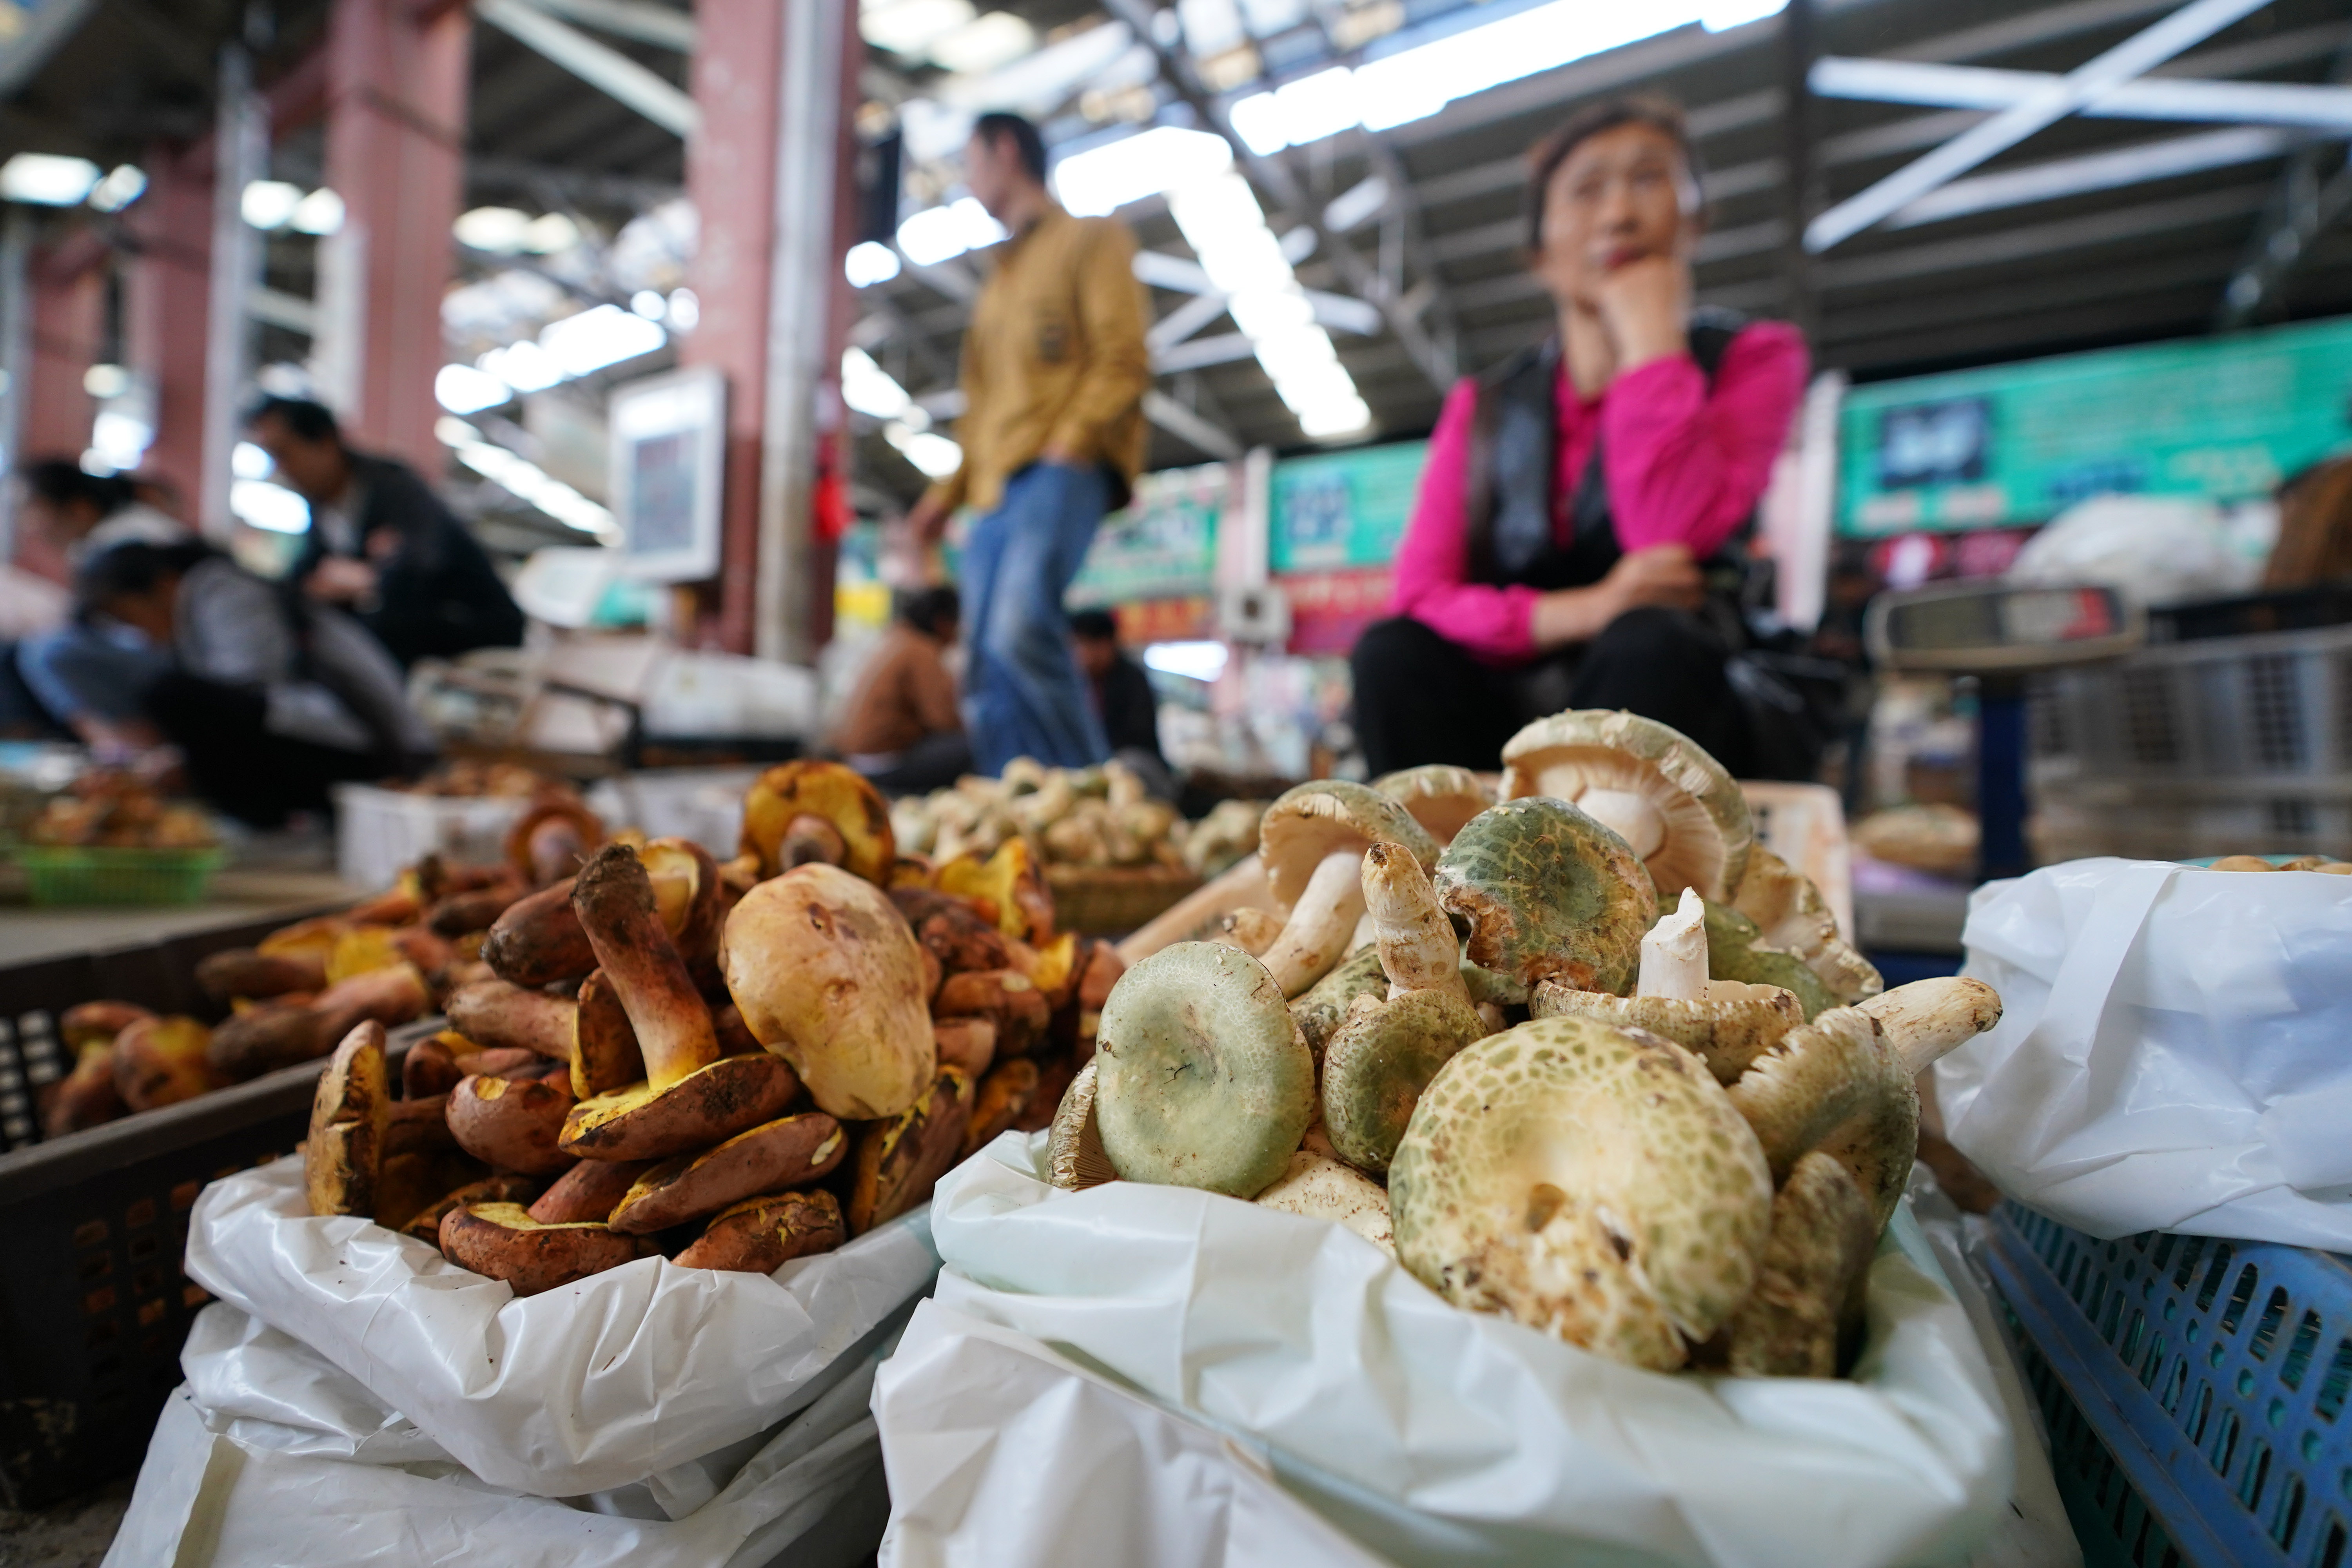 Wild mushrooms on sale at a market in Kunming, Yunnan are seen in this photo taken on June 6, 2023. Yunnan has more than 900 species of wild edible mushrooms, with some 200 species commonly traded in local markets. /CNSPHOTO